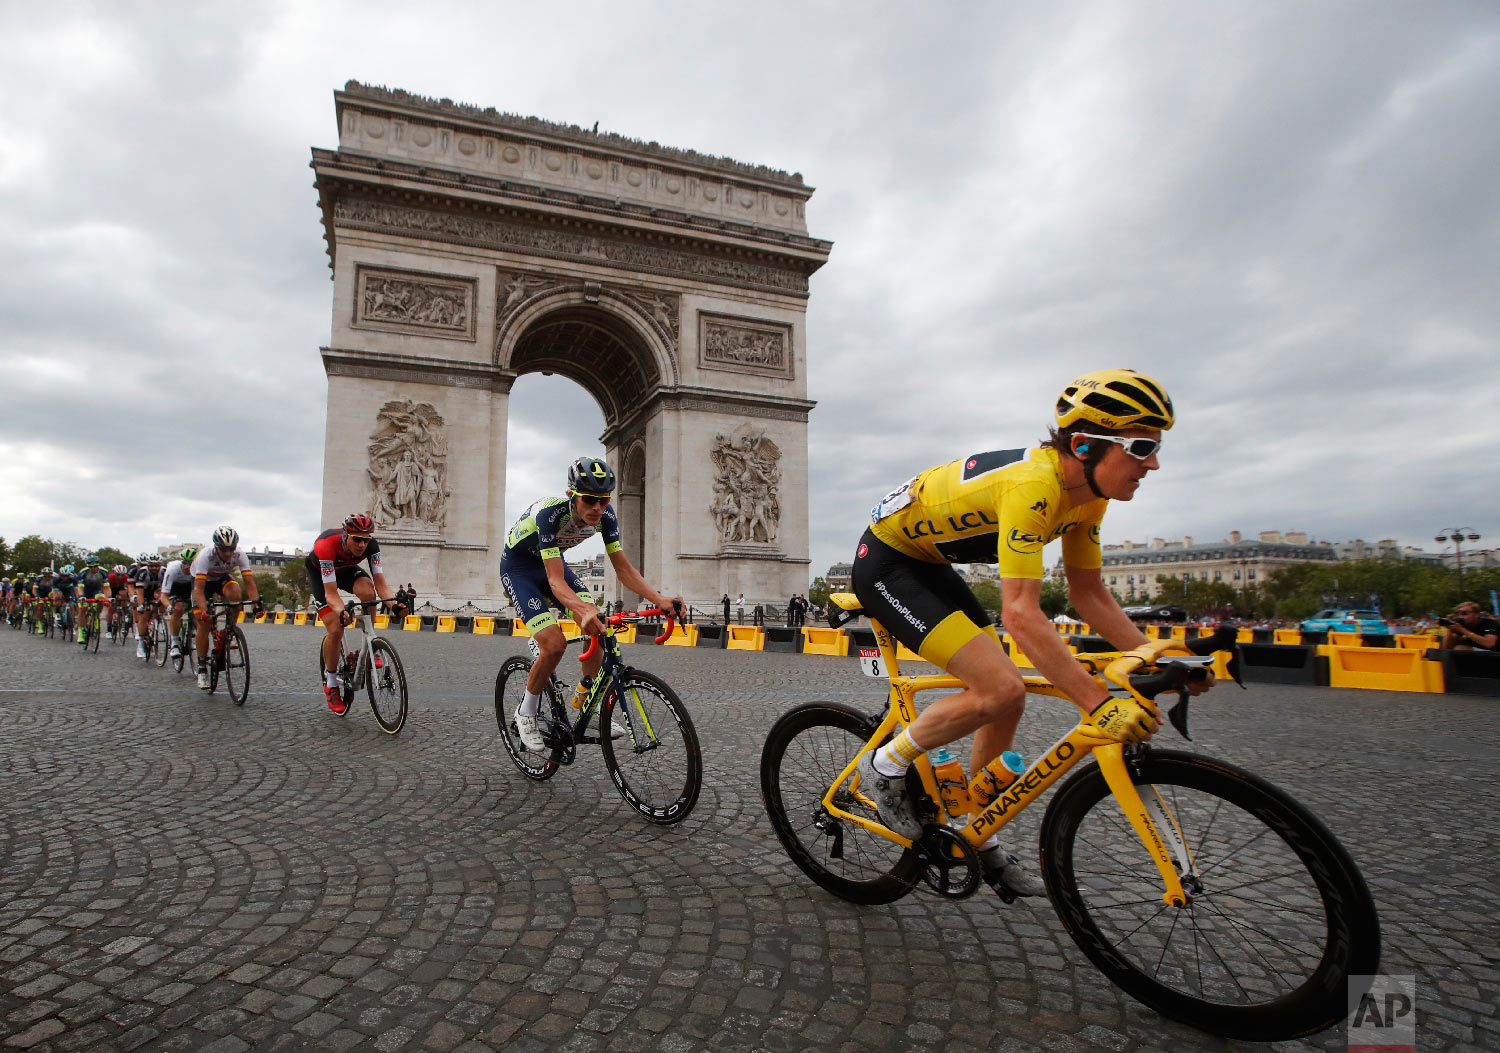  Tour de France winner Geraint Thomas, of Britain, wearing the overall leader's yellow jersey, passes the Arc de Triomphe on July 29, 2018, during the twenty-first stage of the 116-kilometer (72.1-mile) Tour de France cycling race from Houilles to th